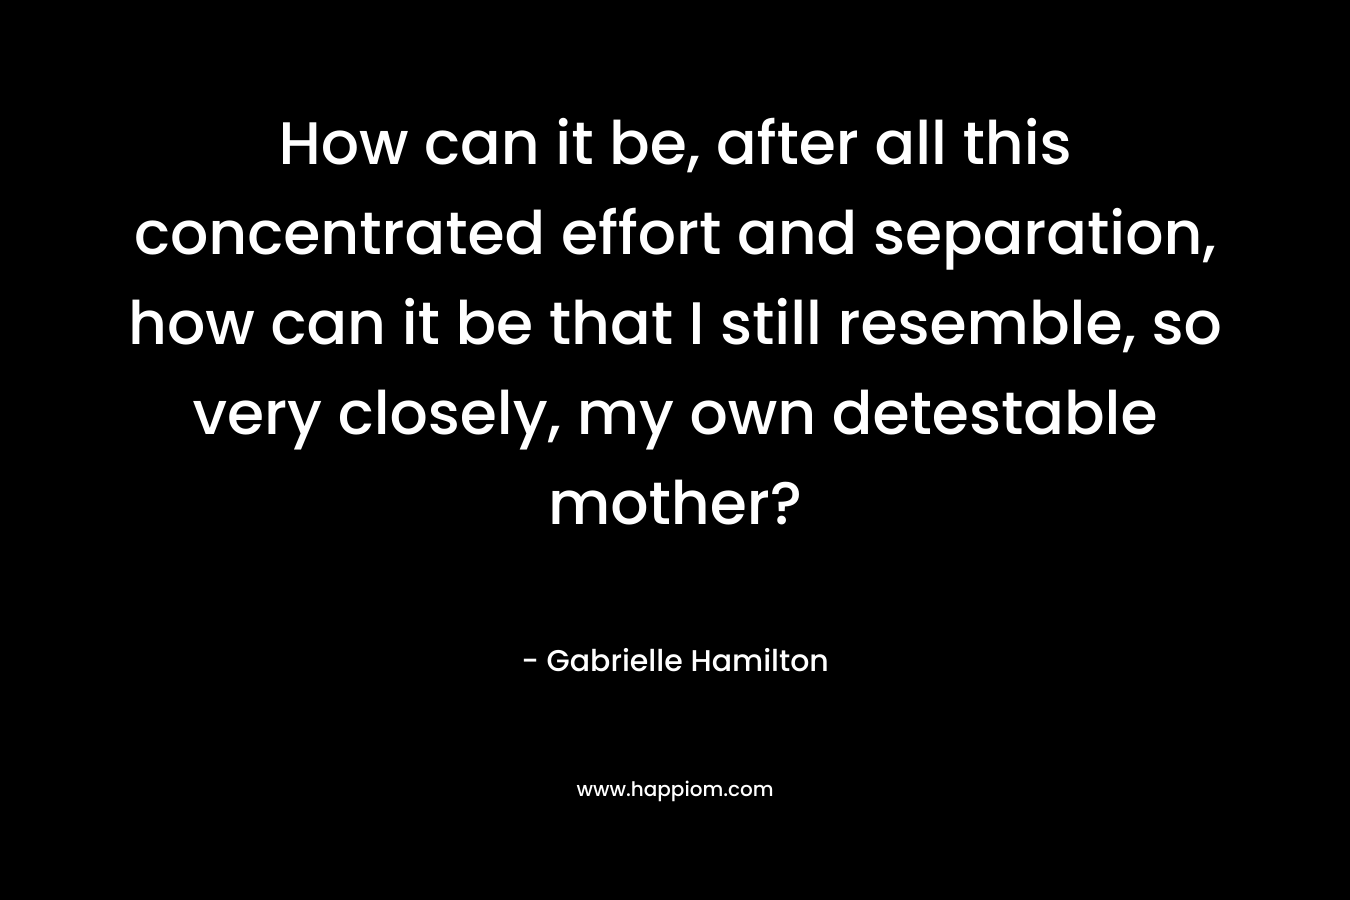 How can it be, after all this concentrated effort and separation, how can it be that I still resemble, so very closely, my own detestable mother? – Gabrielle Hamilton